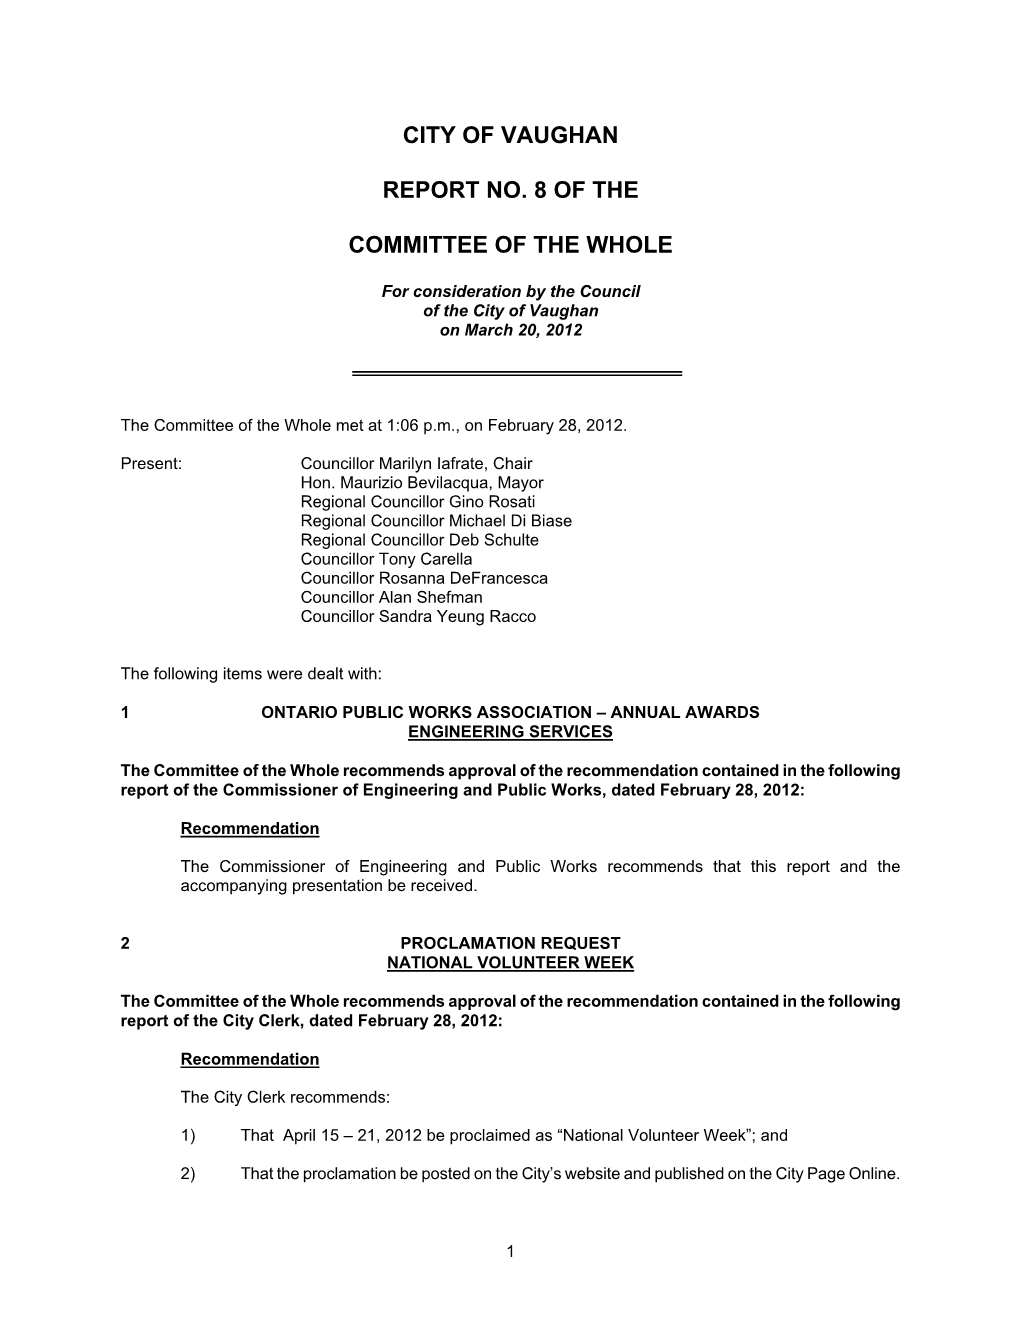 City of Vaughan Report No. 8 of the Committee of the Whole